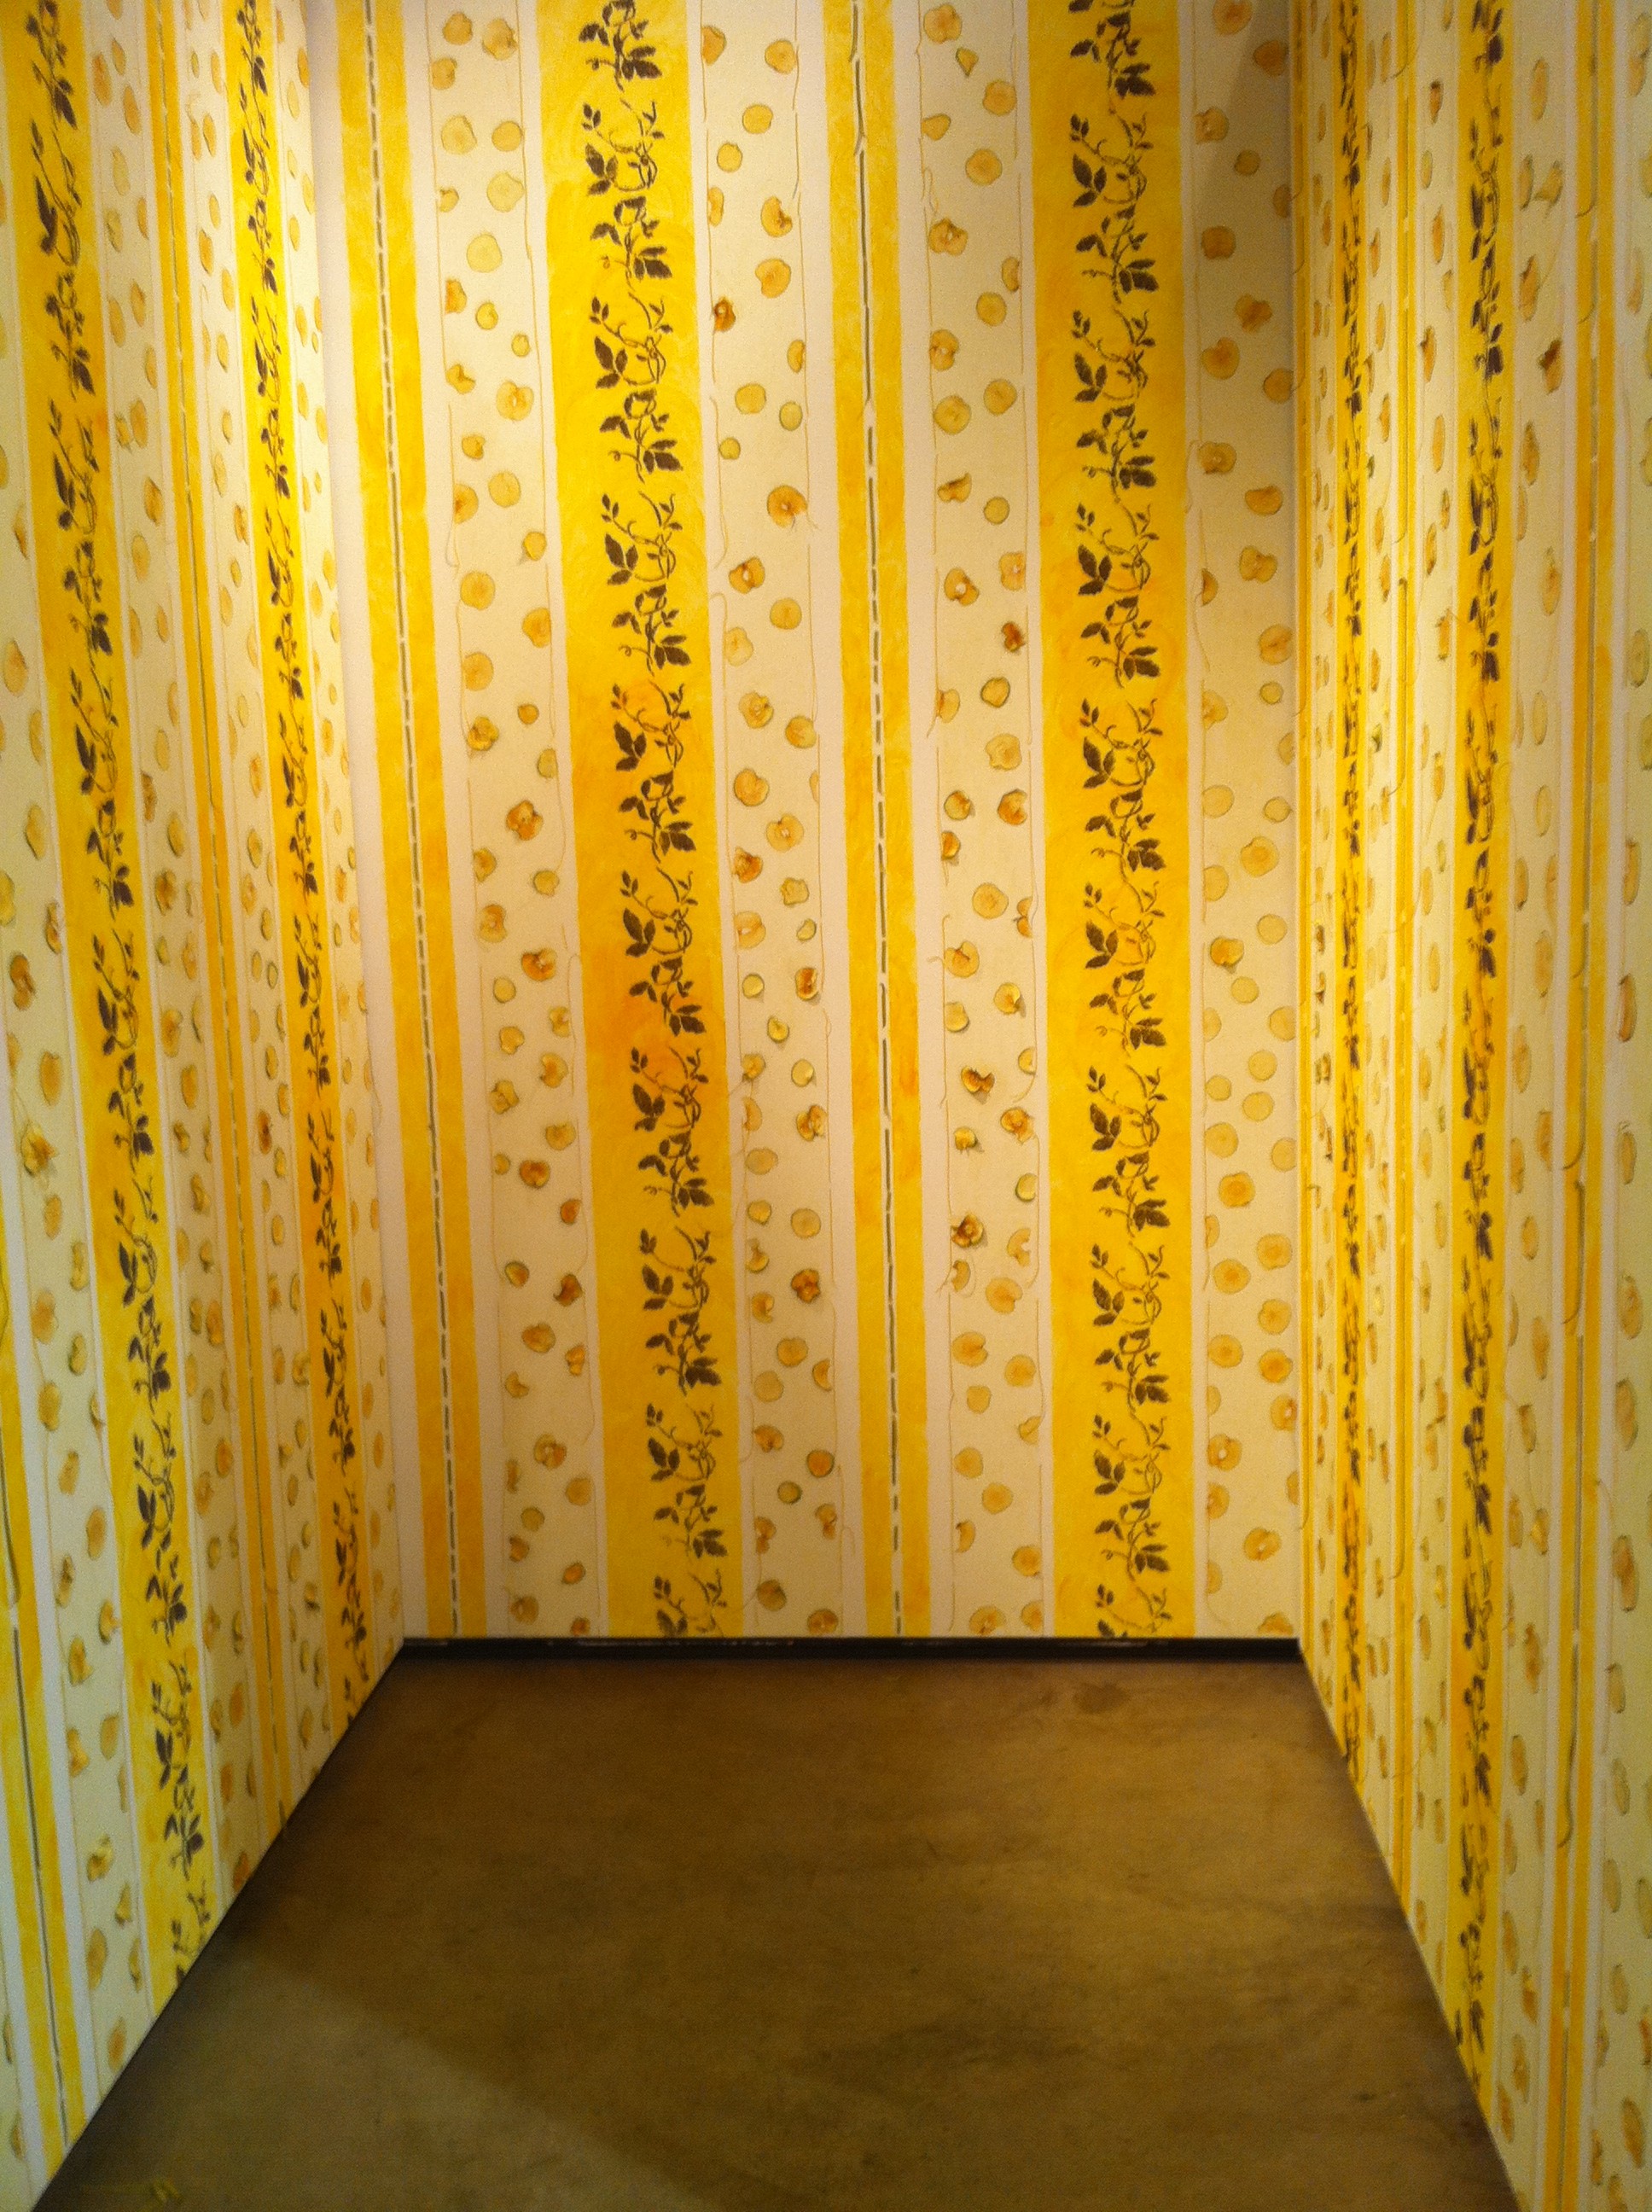 The Yellow Wallpaper I by hyperphagia on DeviantArt